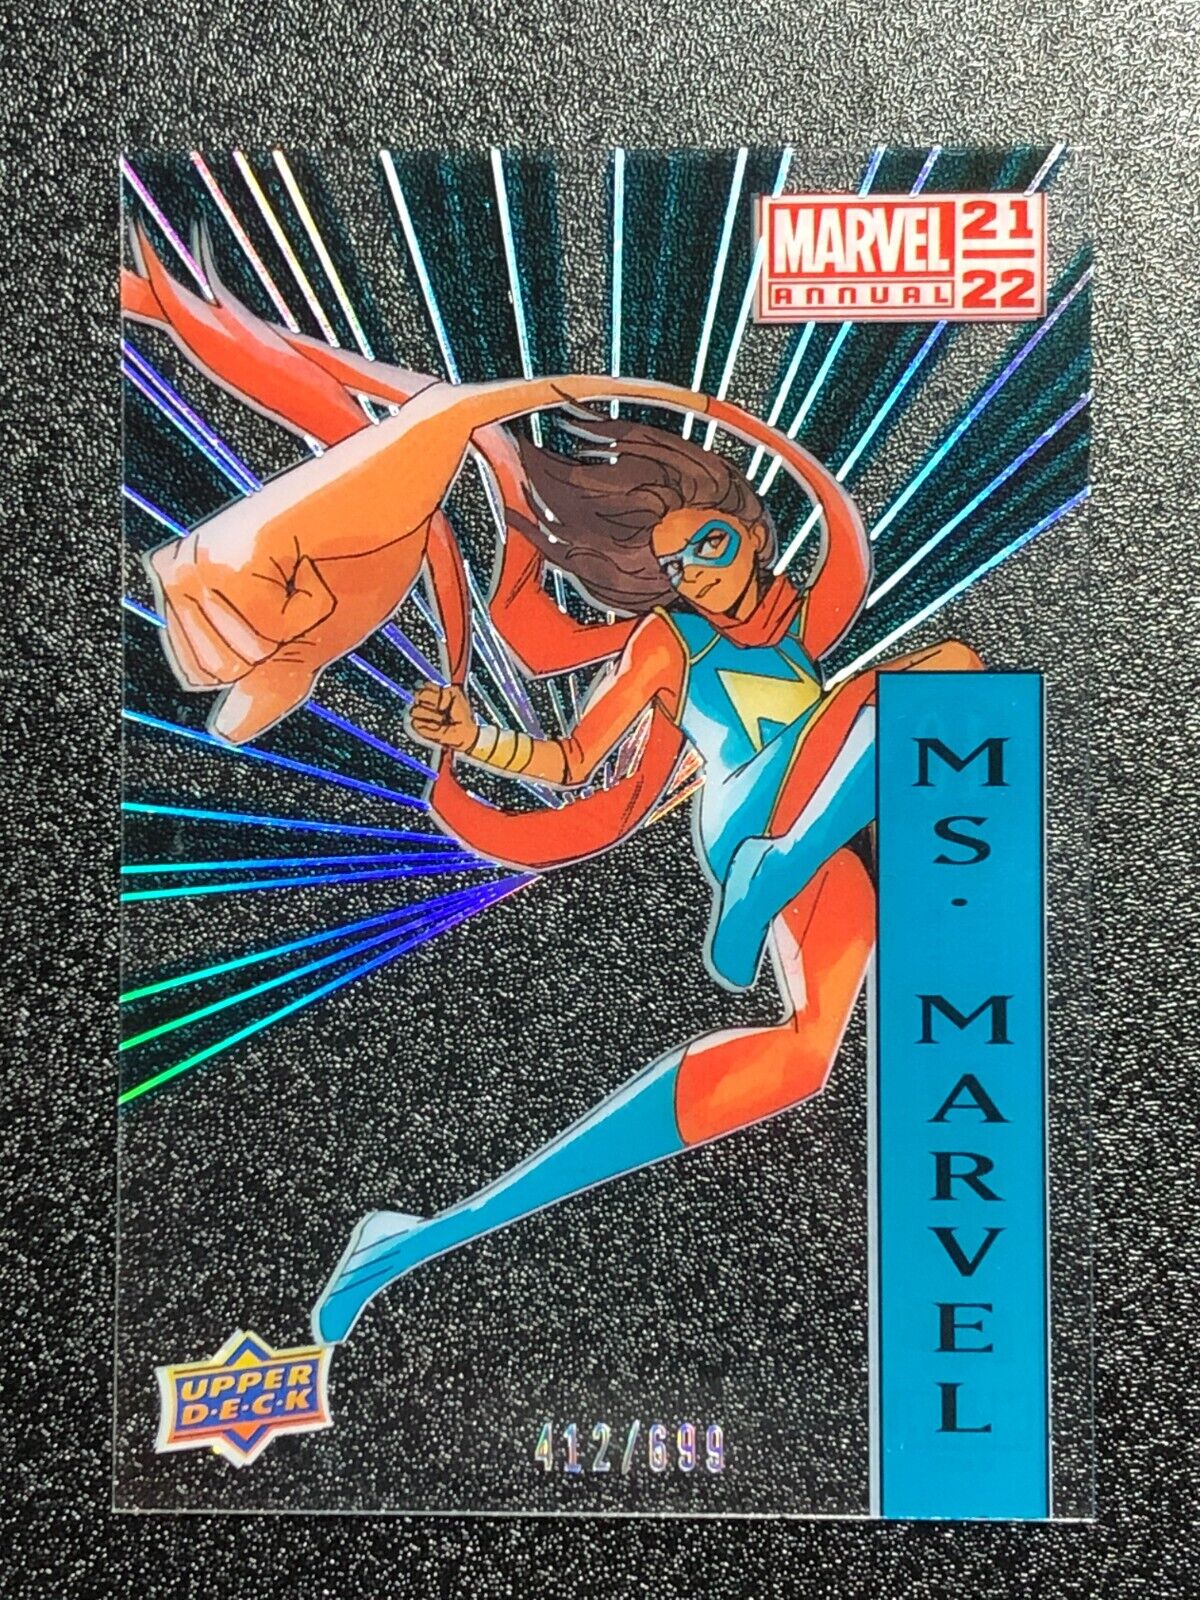 2021-2022 Marvel Annual 🔥 SUSPENDED ANIMATION MS MARVEL #\'D /699 🔥